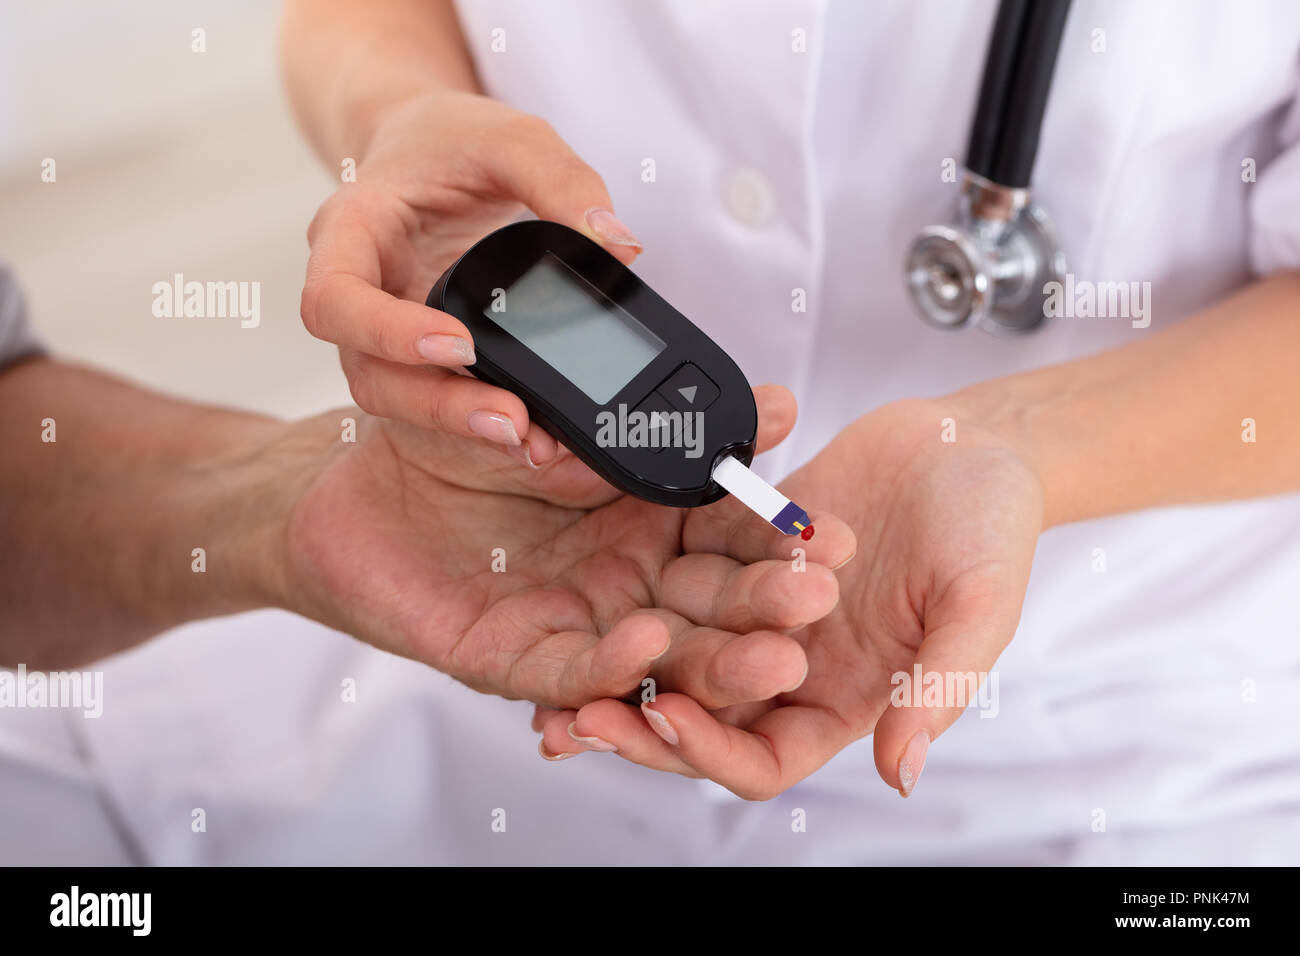 Female Doctor's Hand Measuring Patient's Blood Sugar Level With Glucometer Stock Photo